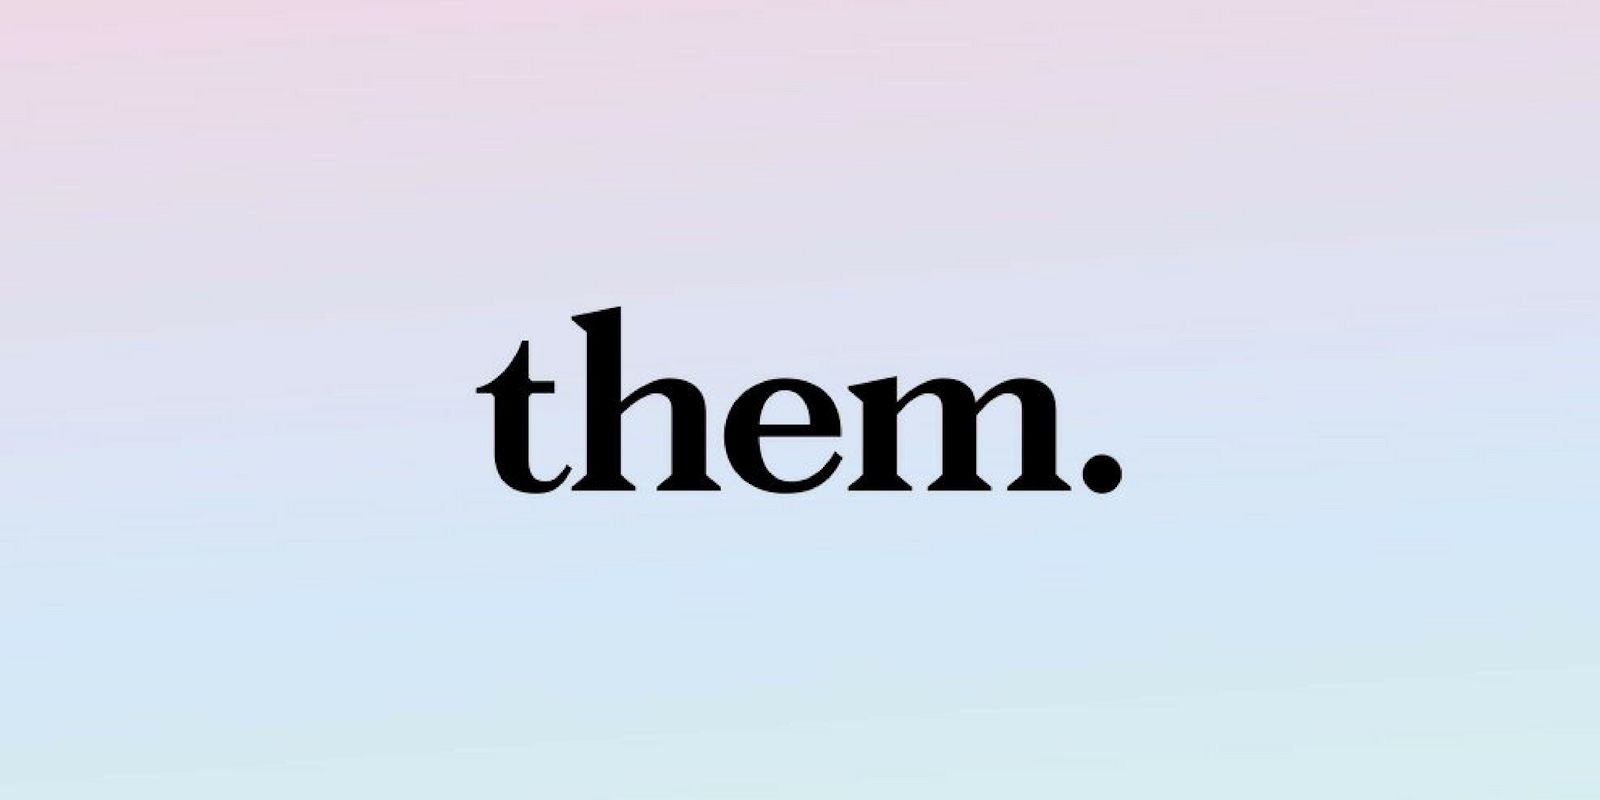 The banner for a new Condé Nast publication called, 'Them'